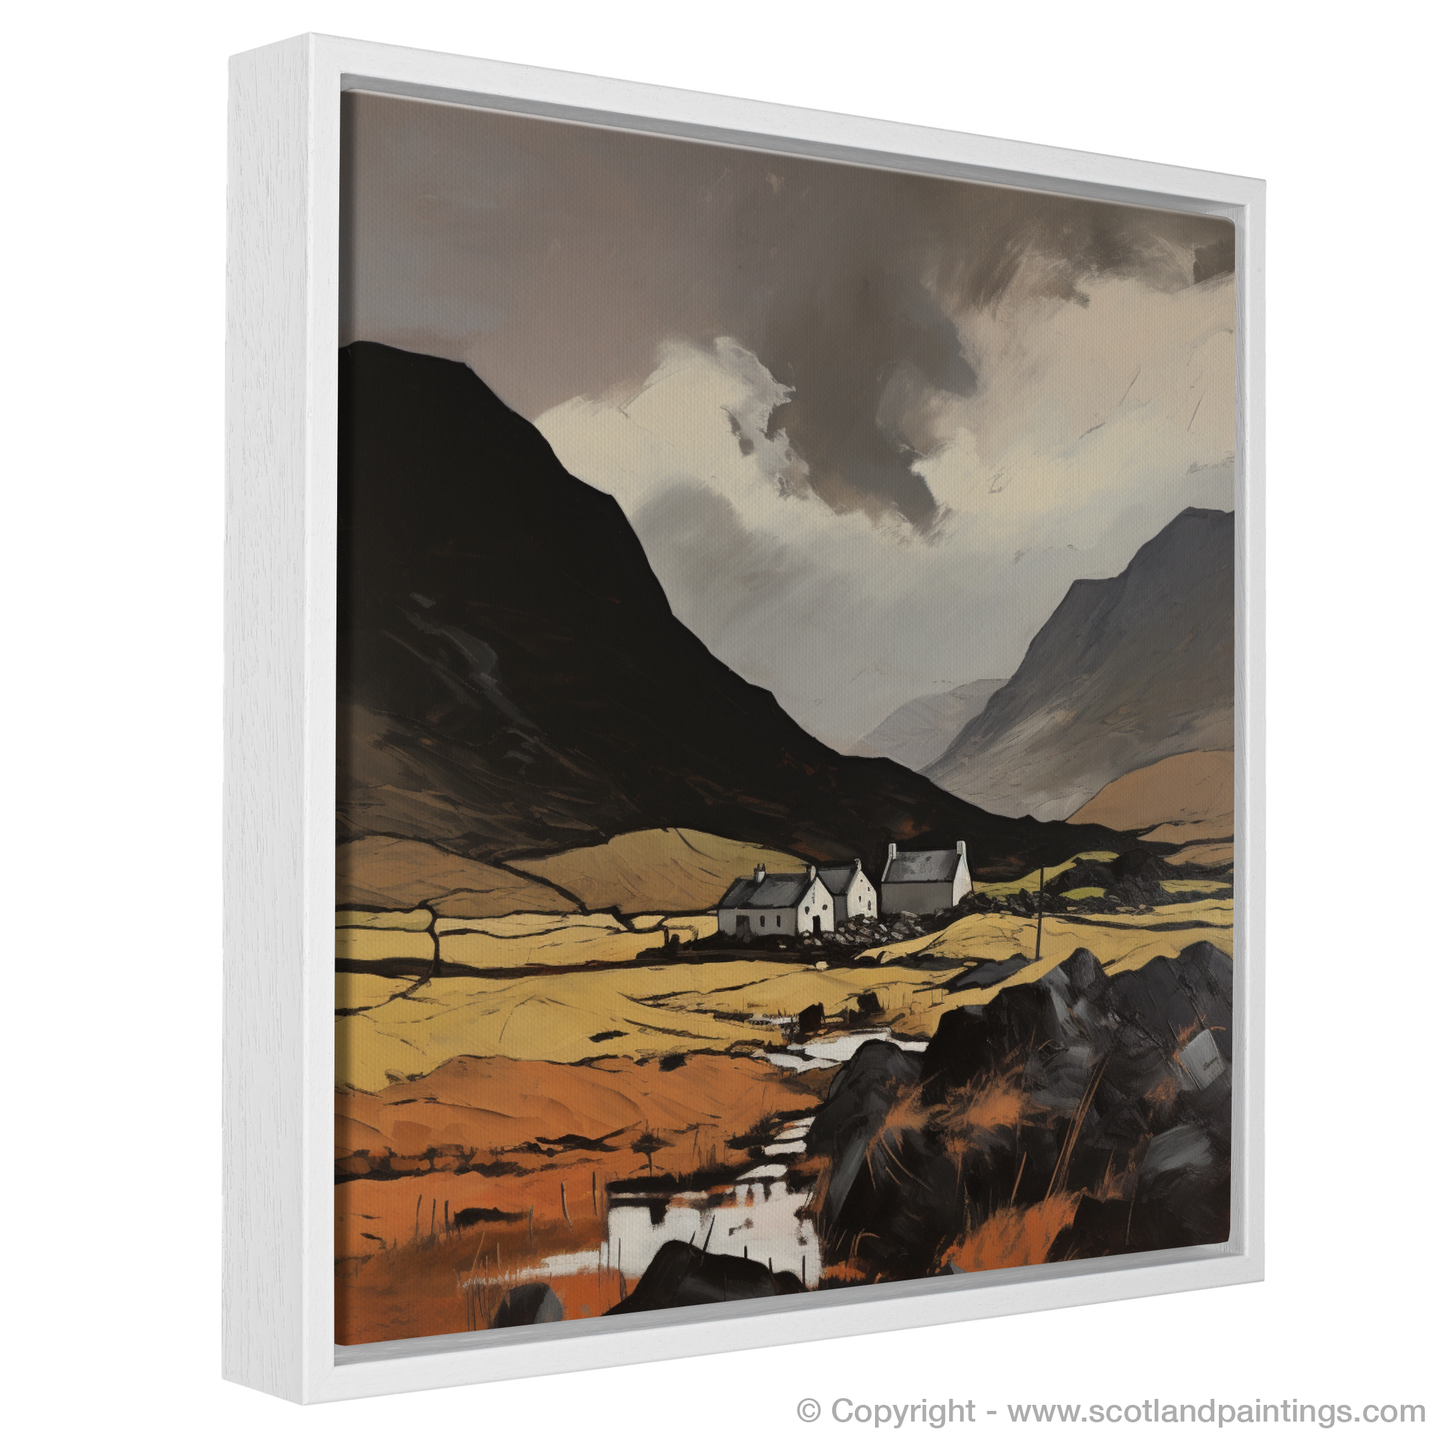 Painting and Art Print of Càrn an Tuirc entitled "Càrn an Tuirc Unleashed: An Expressionist Ode to the Scottish Highlands".